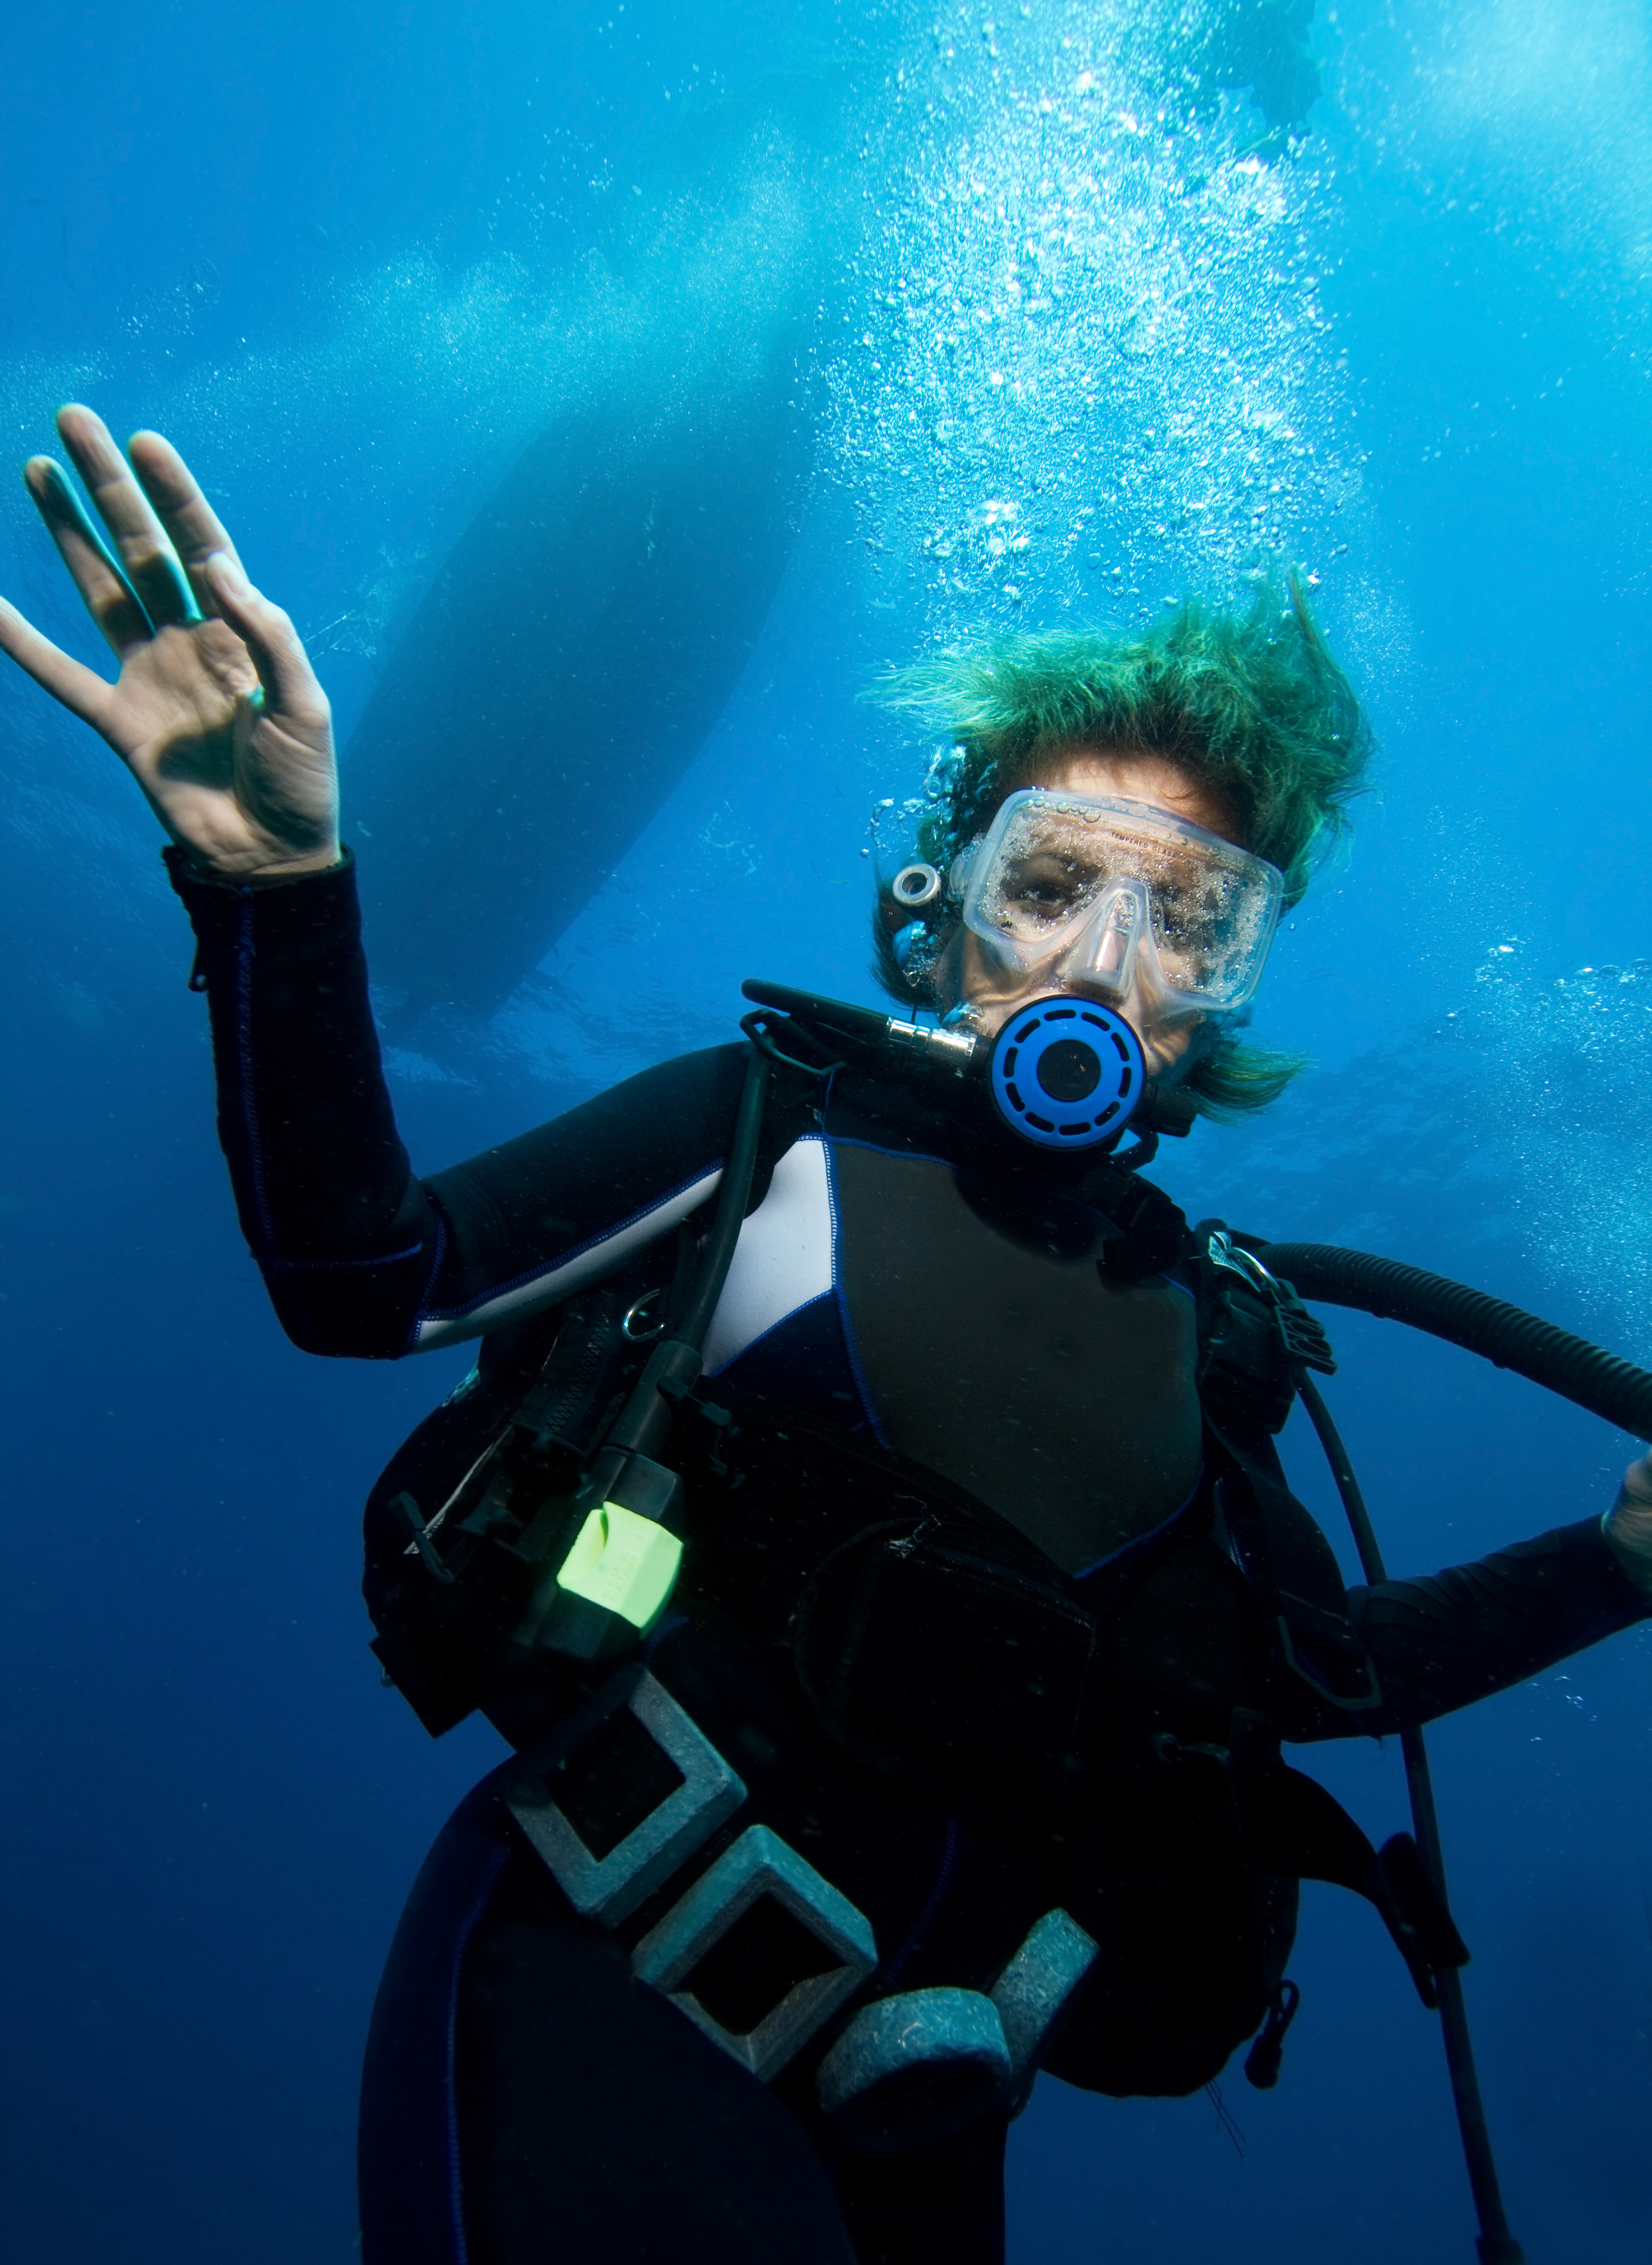 Female diver manages to avoid lung overexpansion injuries by never holding her breath during an ascent and using the proper ascent rates